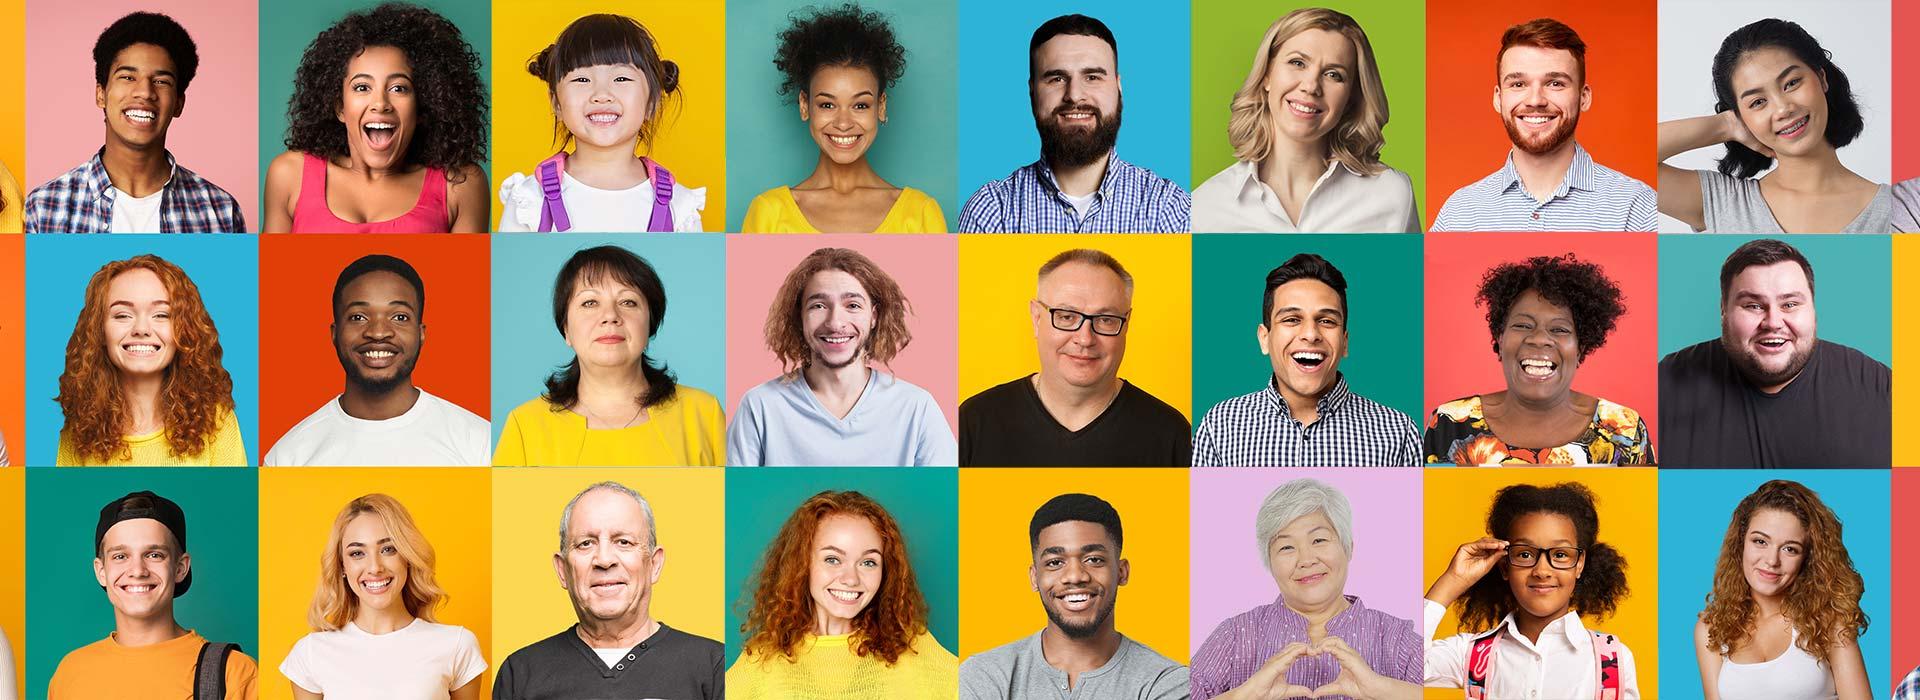 A group of portraits showing the diversity of our community